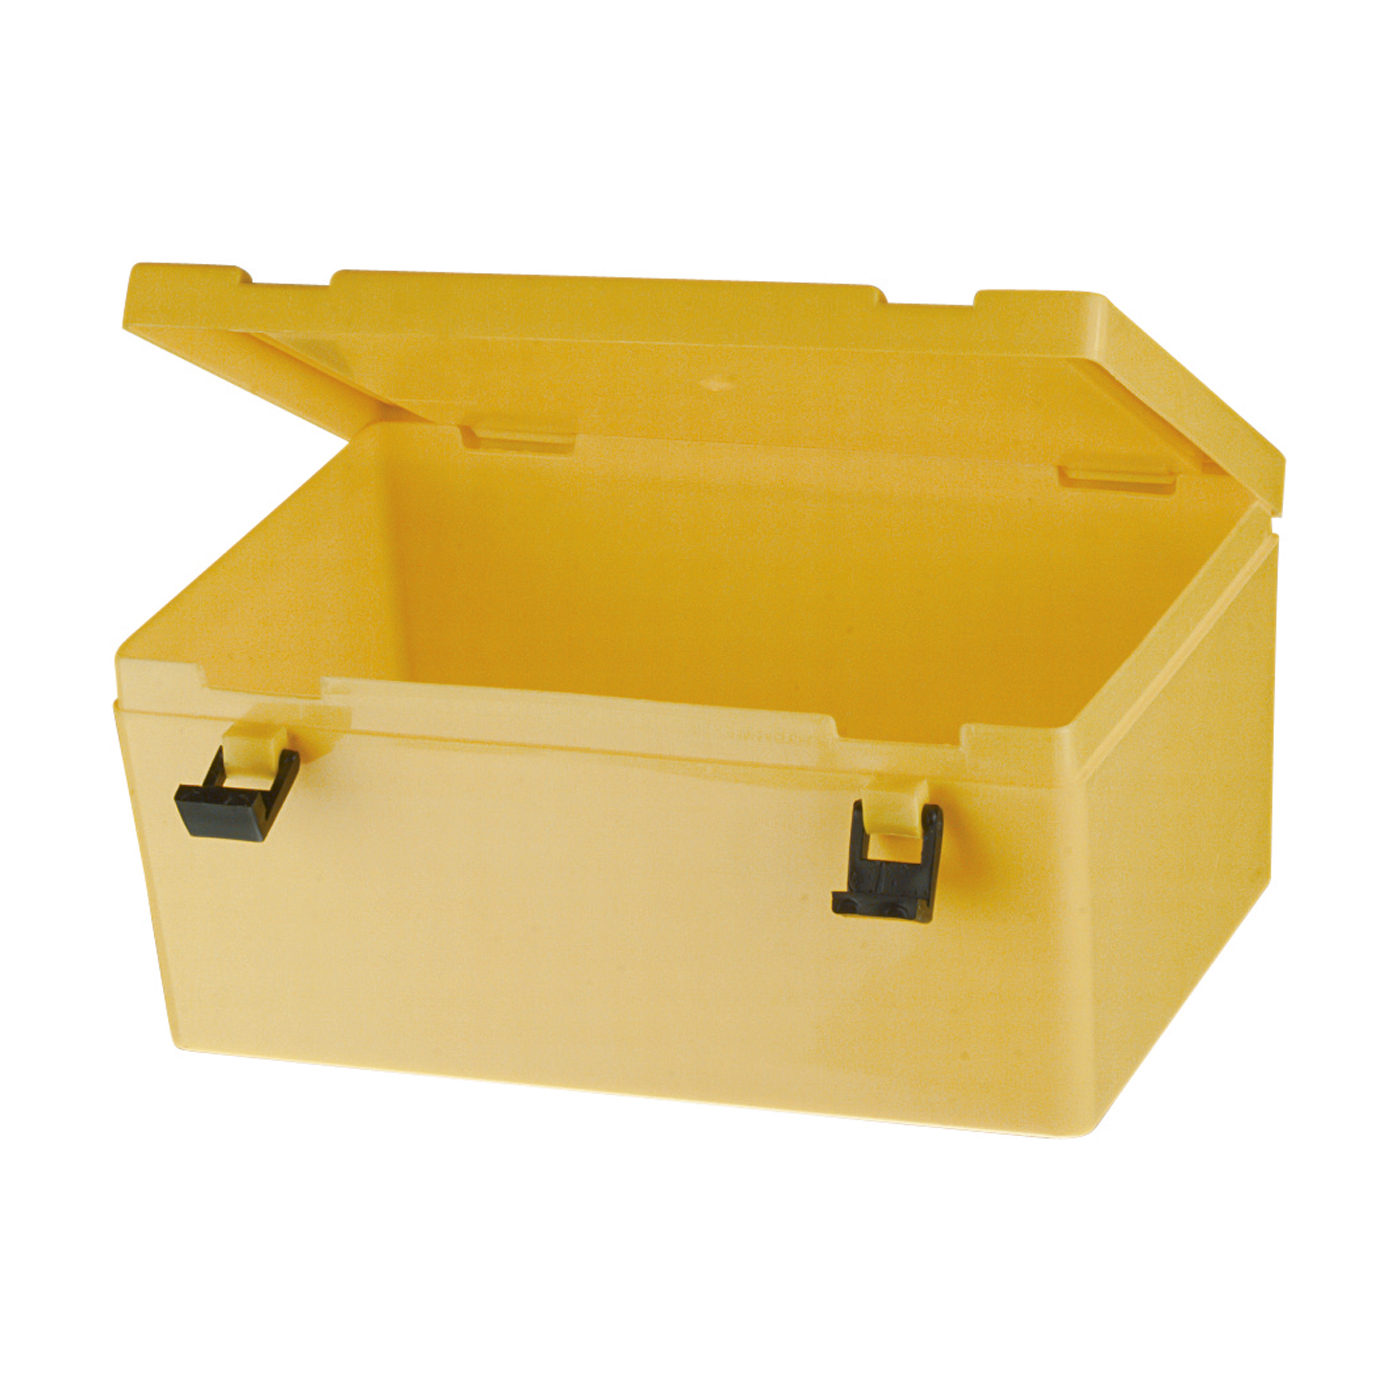 Dispatch Container, 1.3 l, Yellow - 1 piece